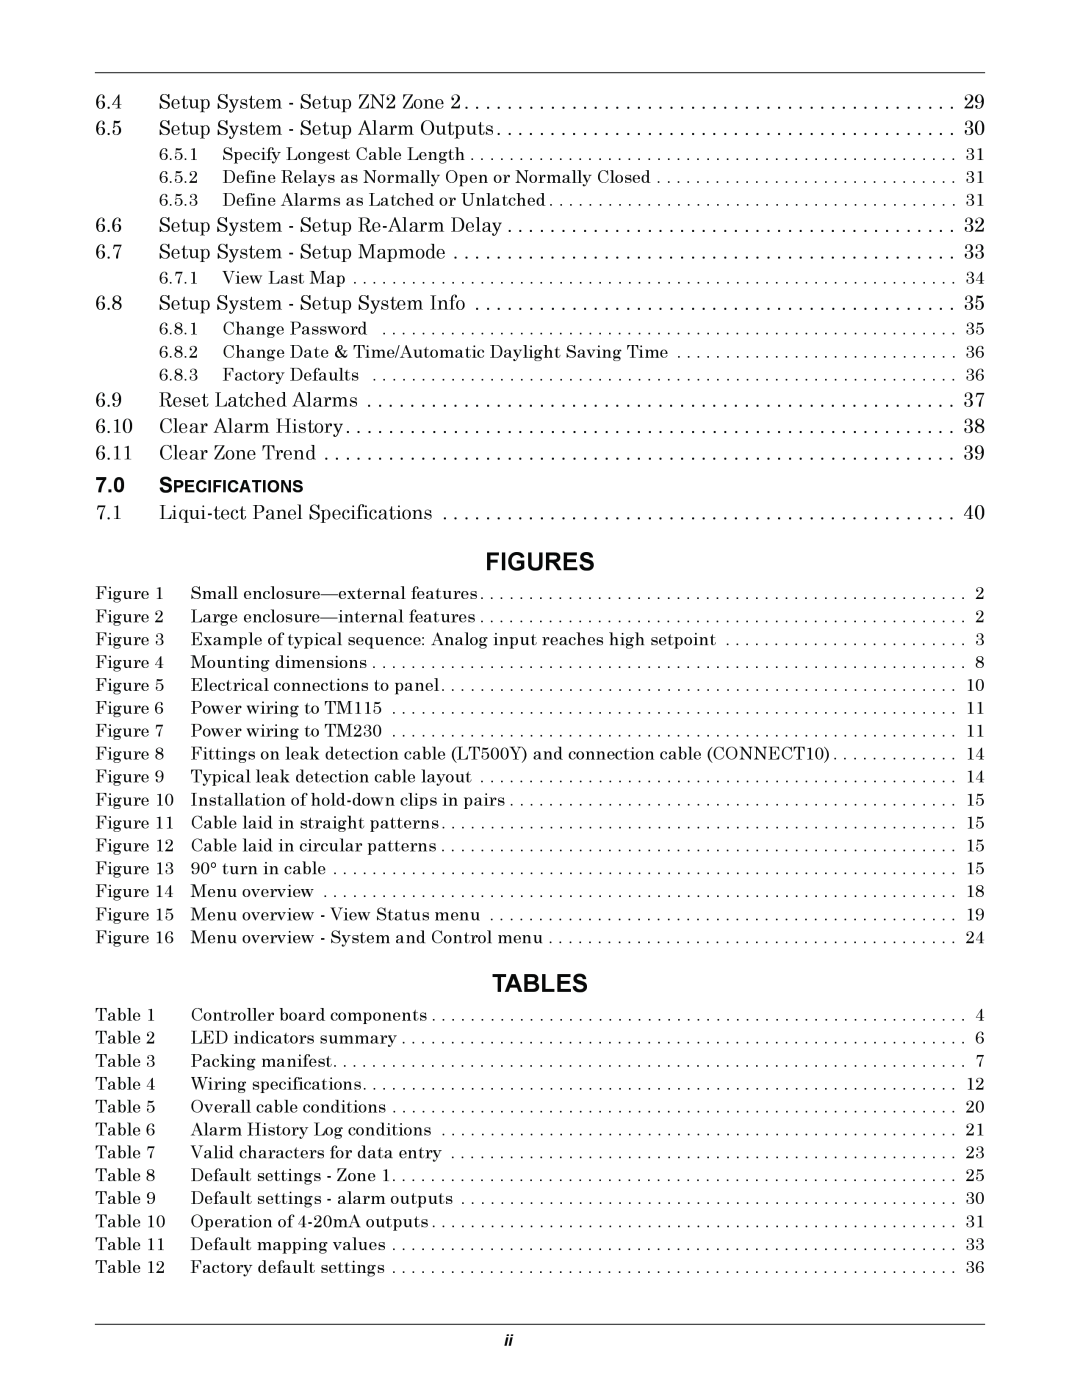 Emerson MC68HC16Z1 user manual Figures, Tables, 7.0SPECIFICATIONS 